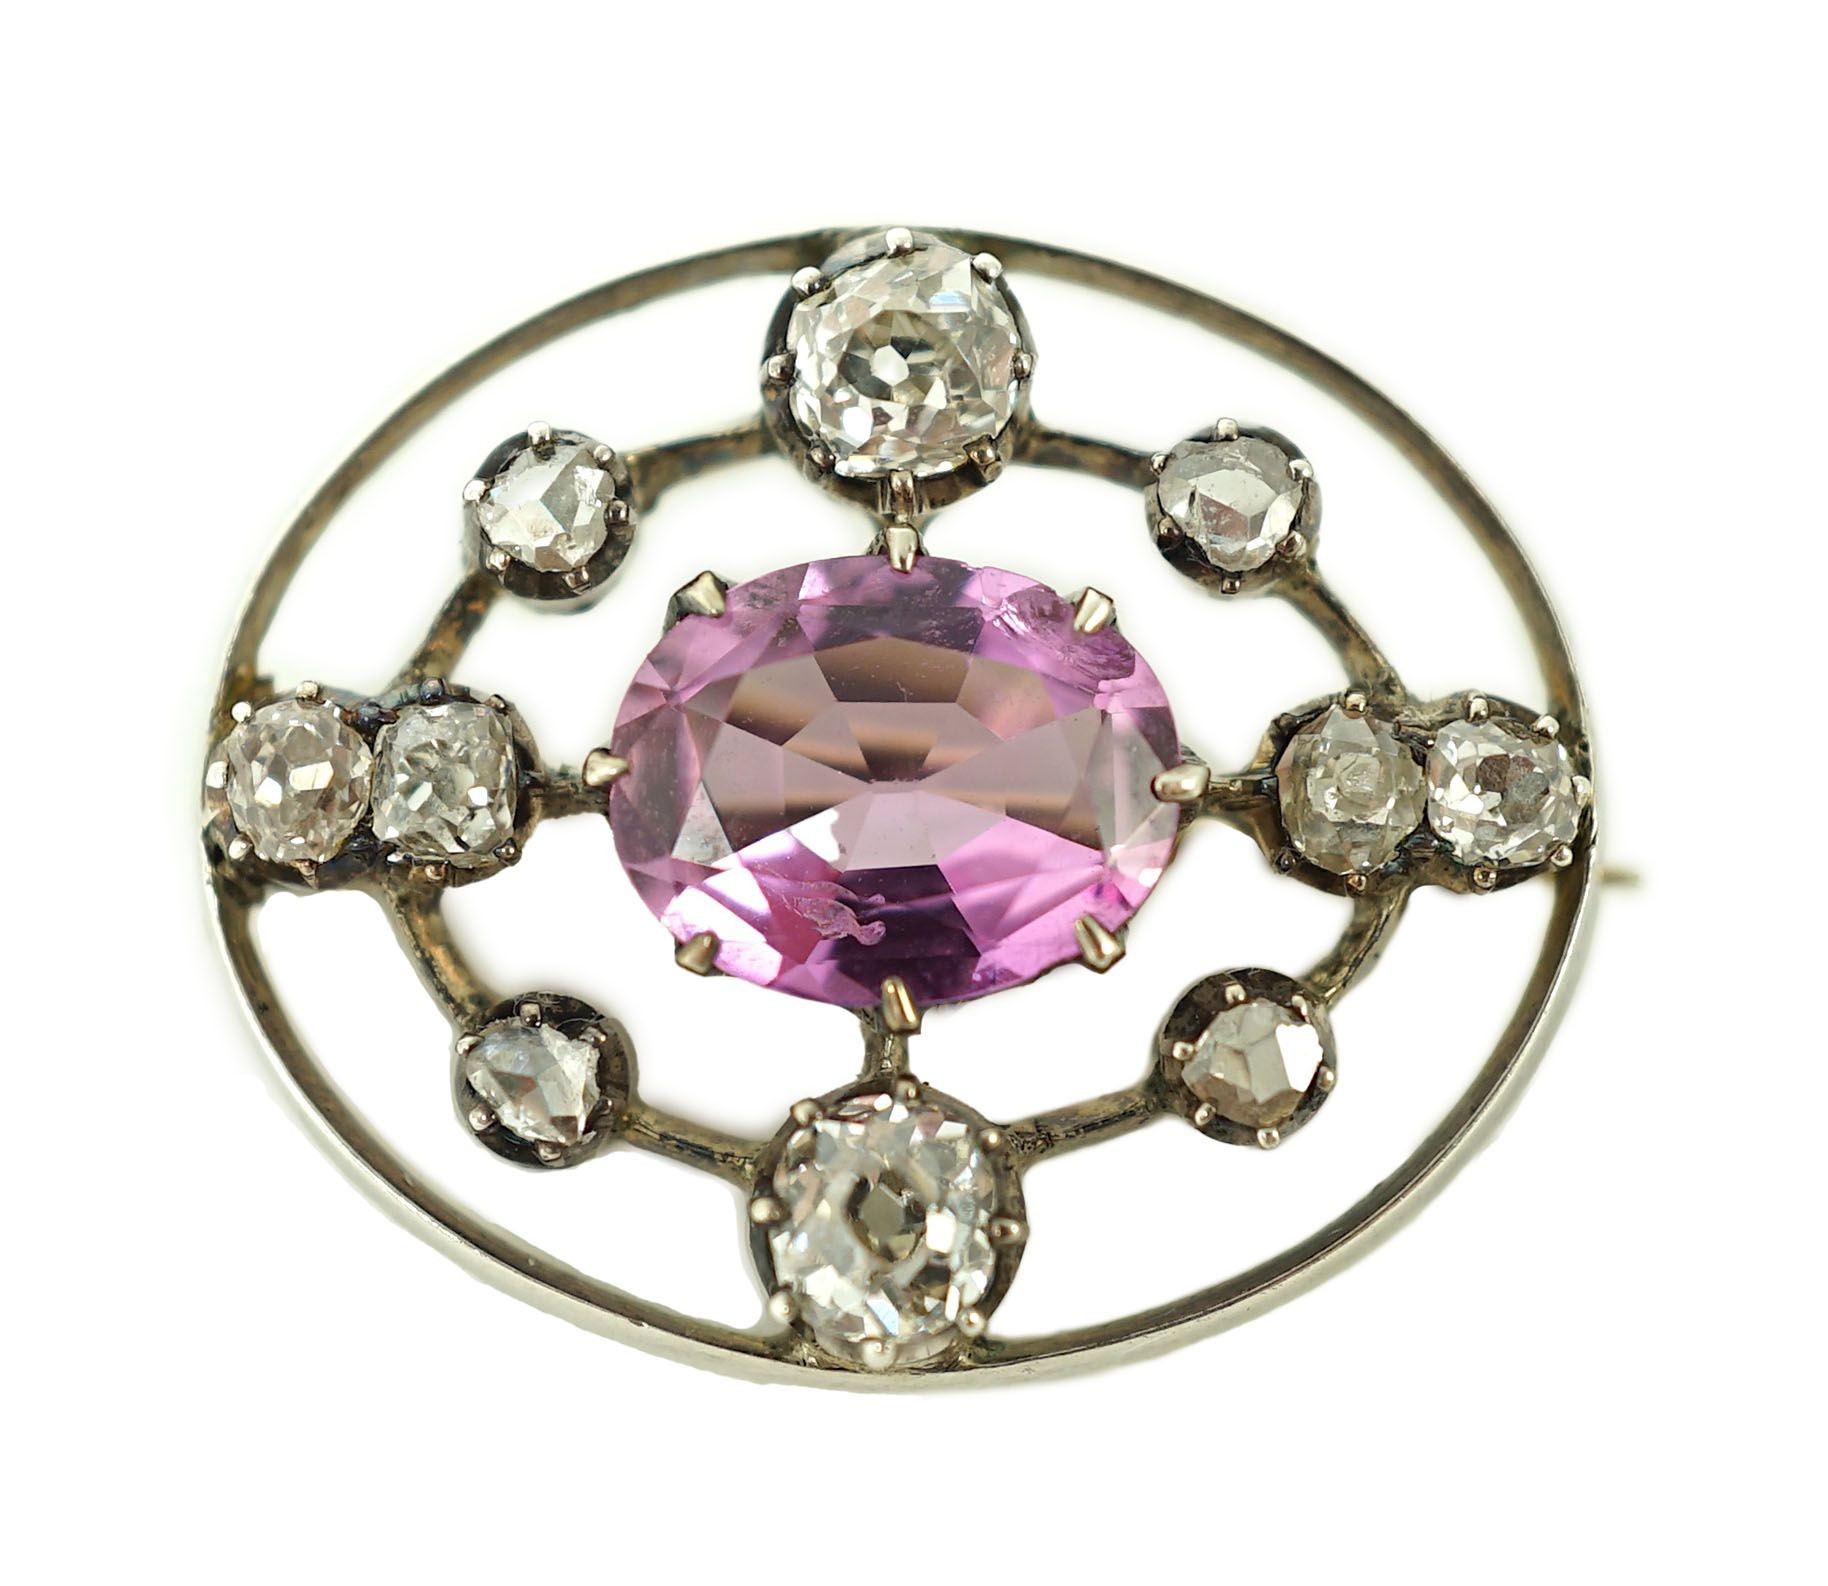 A 19th century gold and silver, pink topaz and diamond set openwork oval brooch